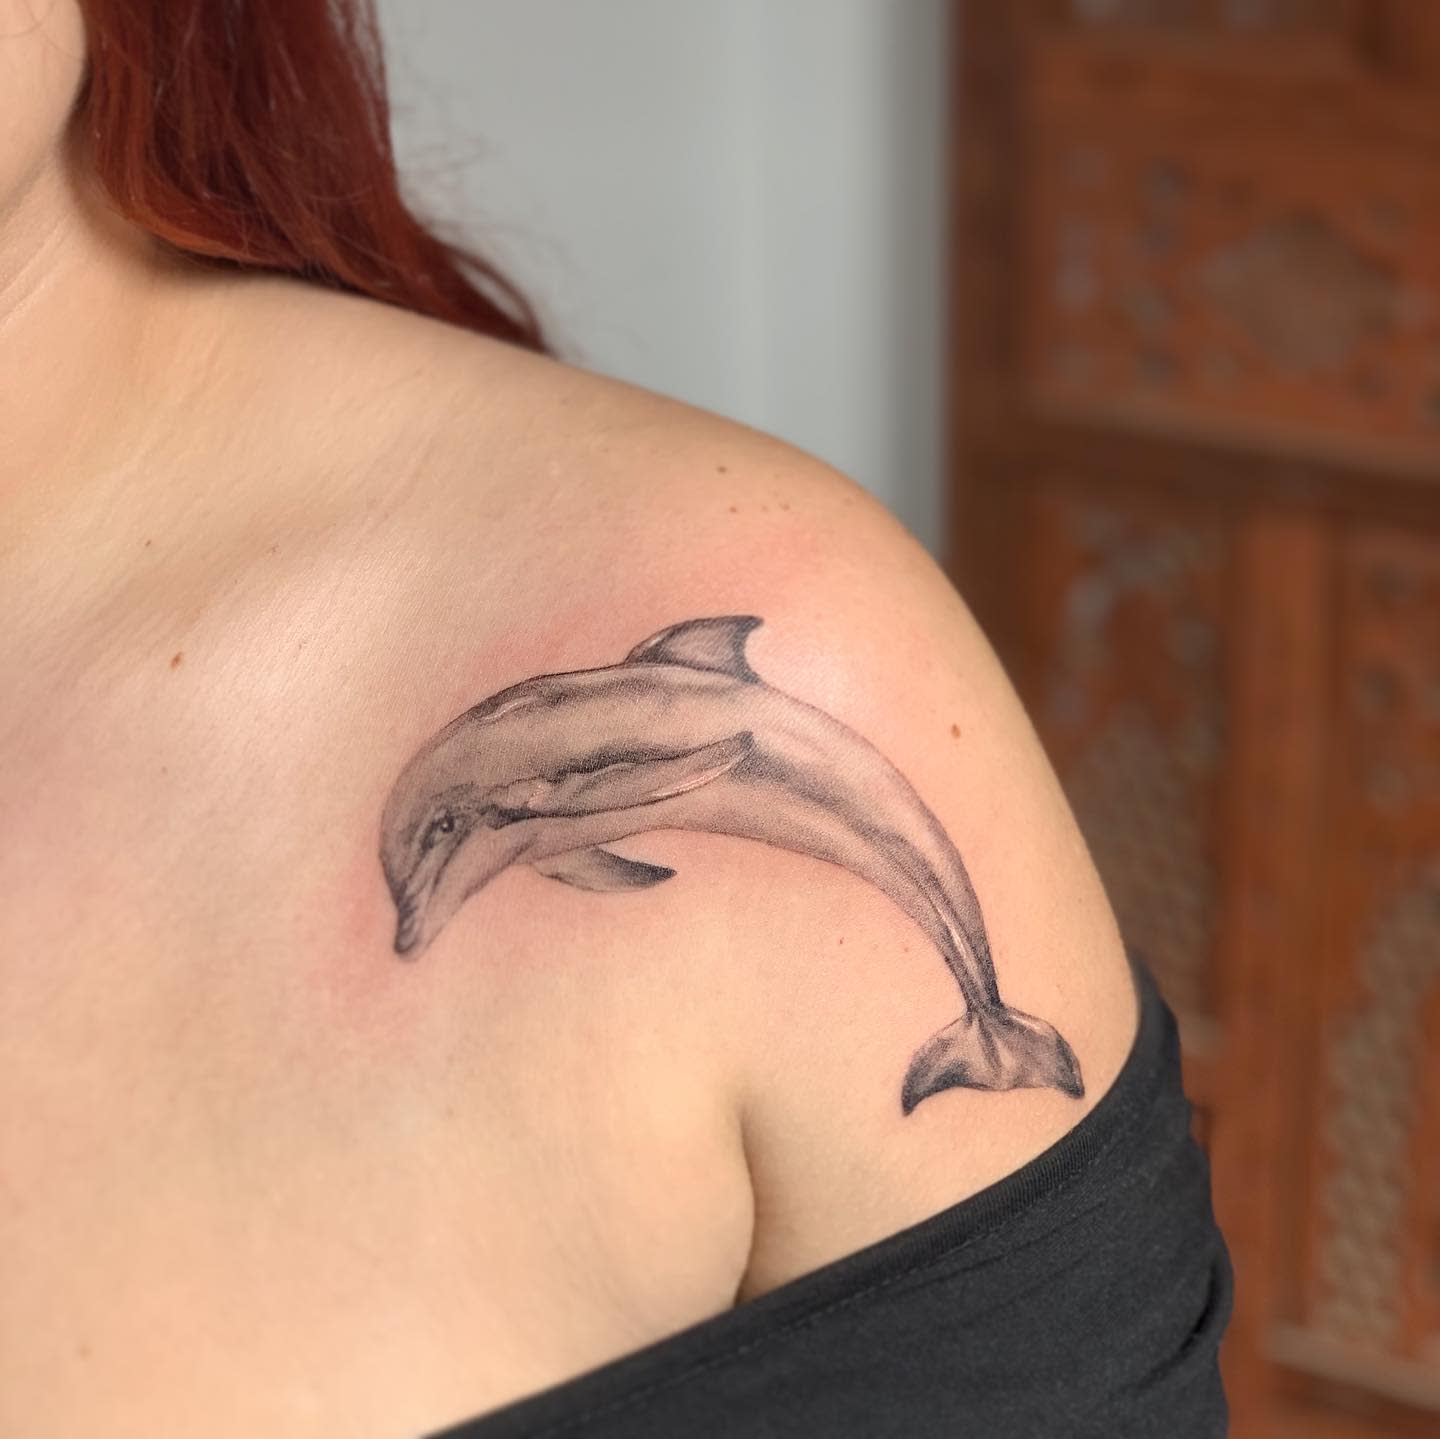 30 Amazing Dolphin Tattoo Ideas And Designs with Meaning